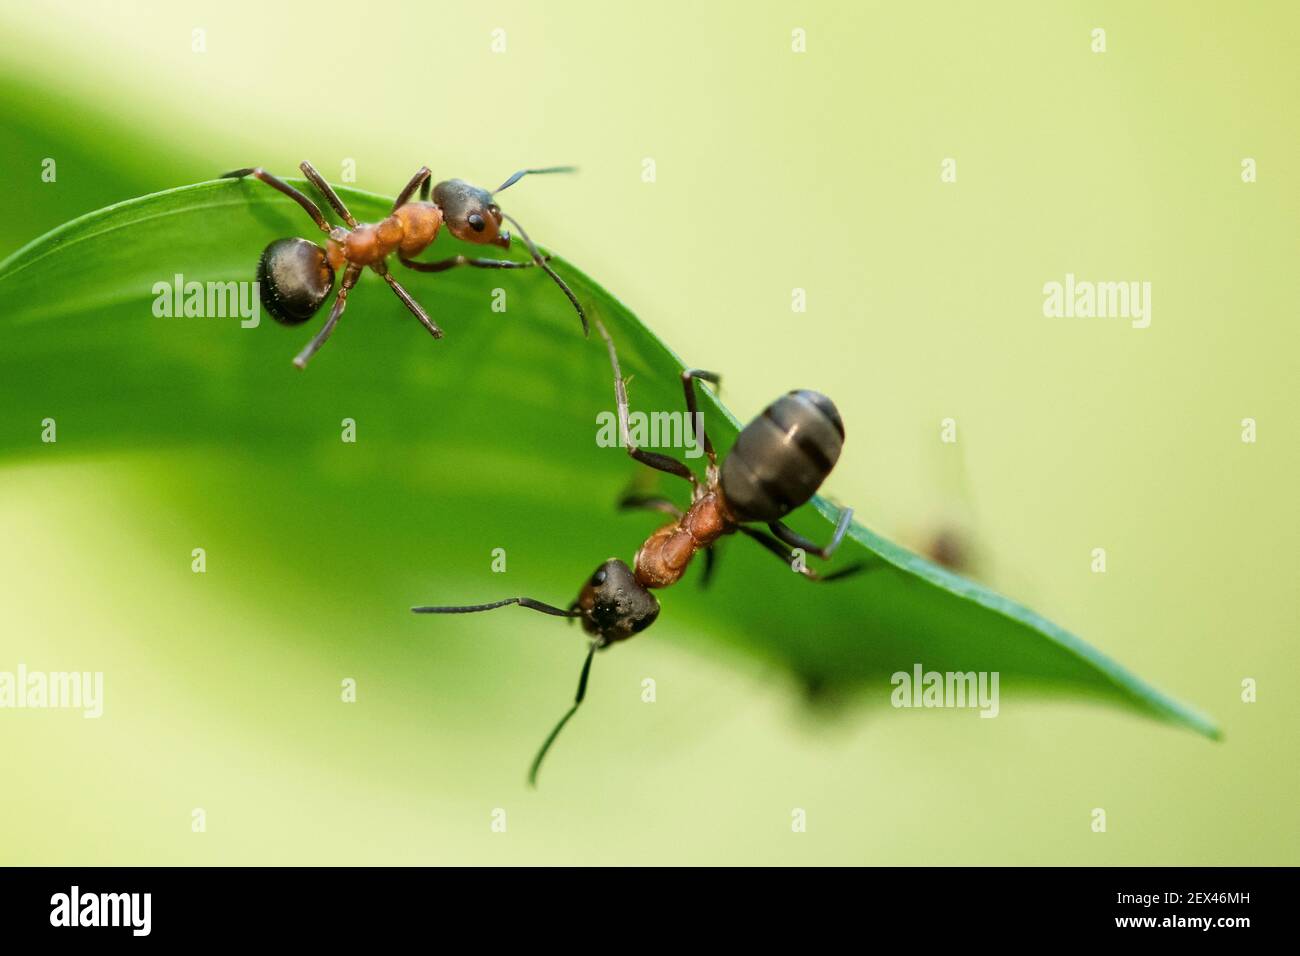 European Red Wood Ants (Formica polyctena) on a leaf, Lorraine, France Stock Photo